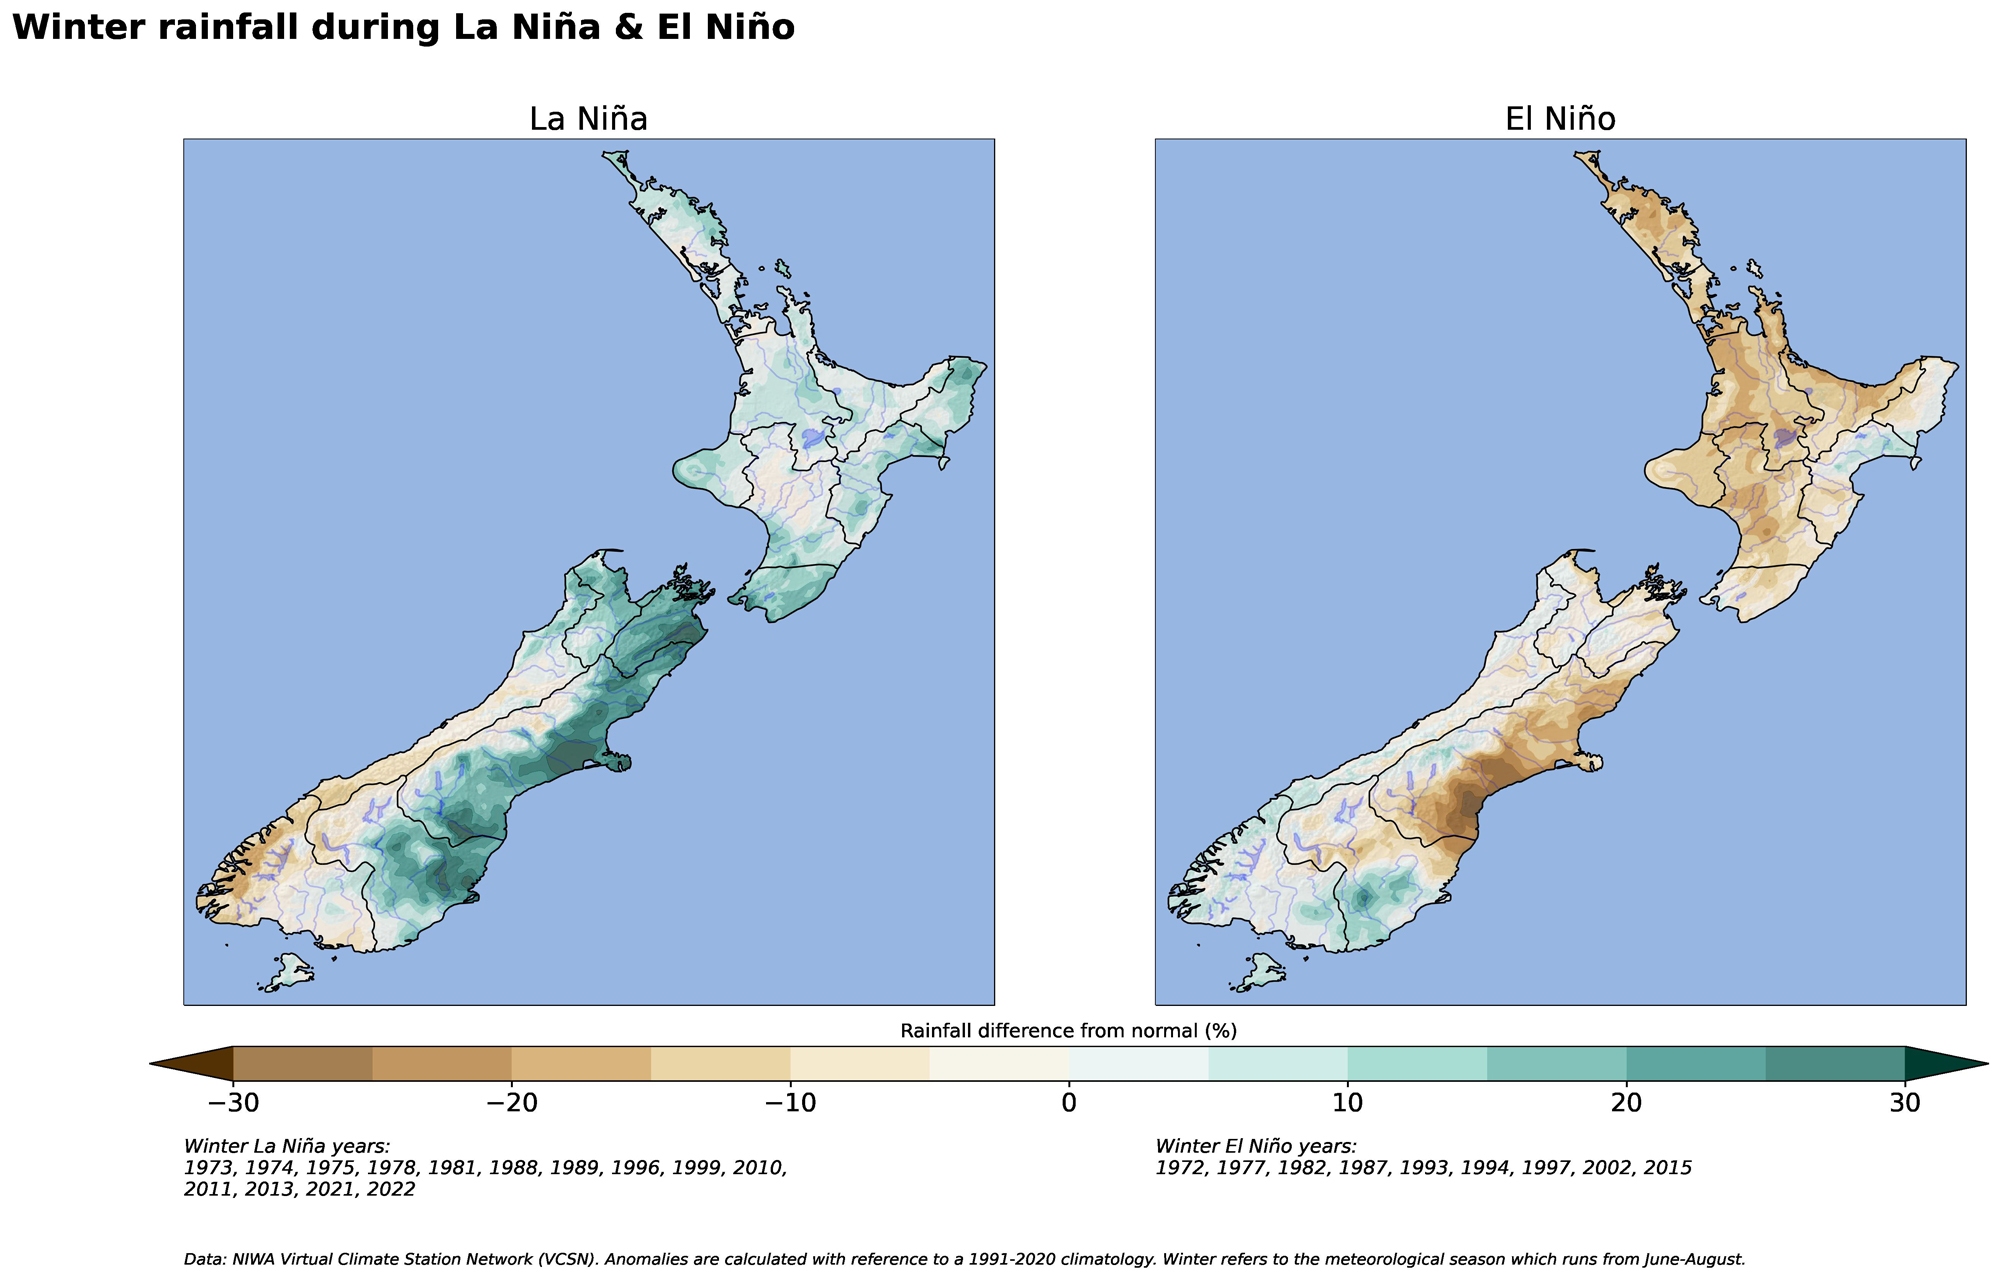 New Zealand maps of percentage difference of winter rainfall from normal during La Niña and El Niño.